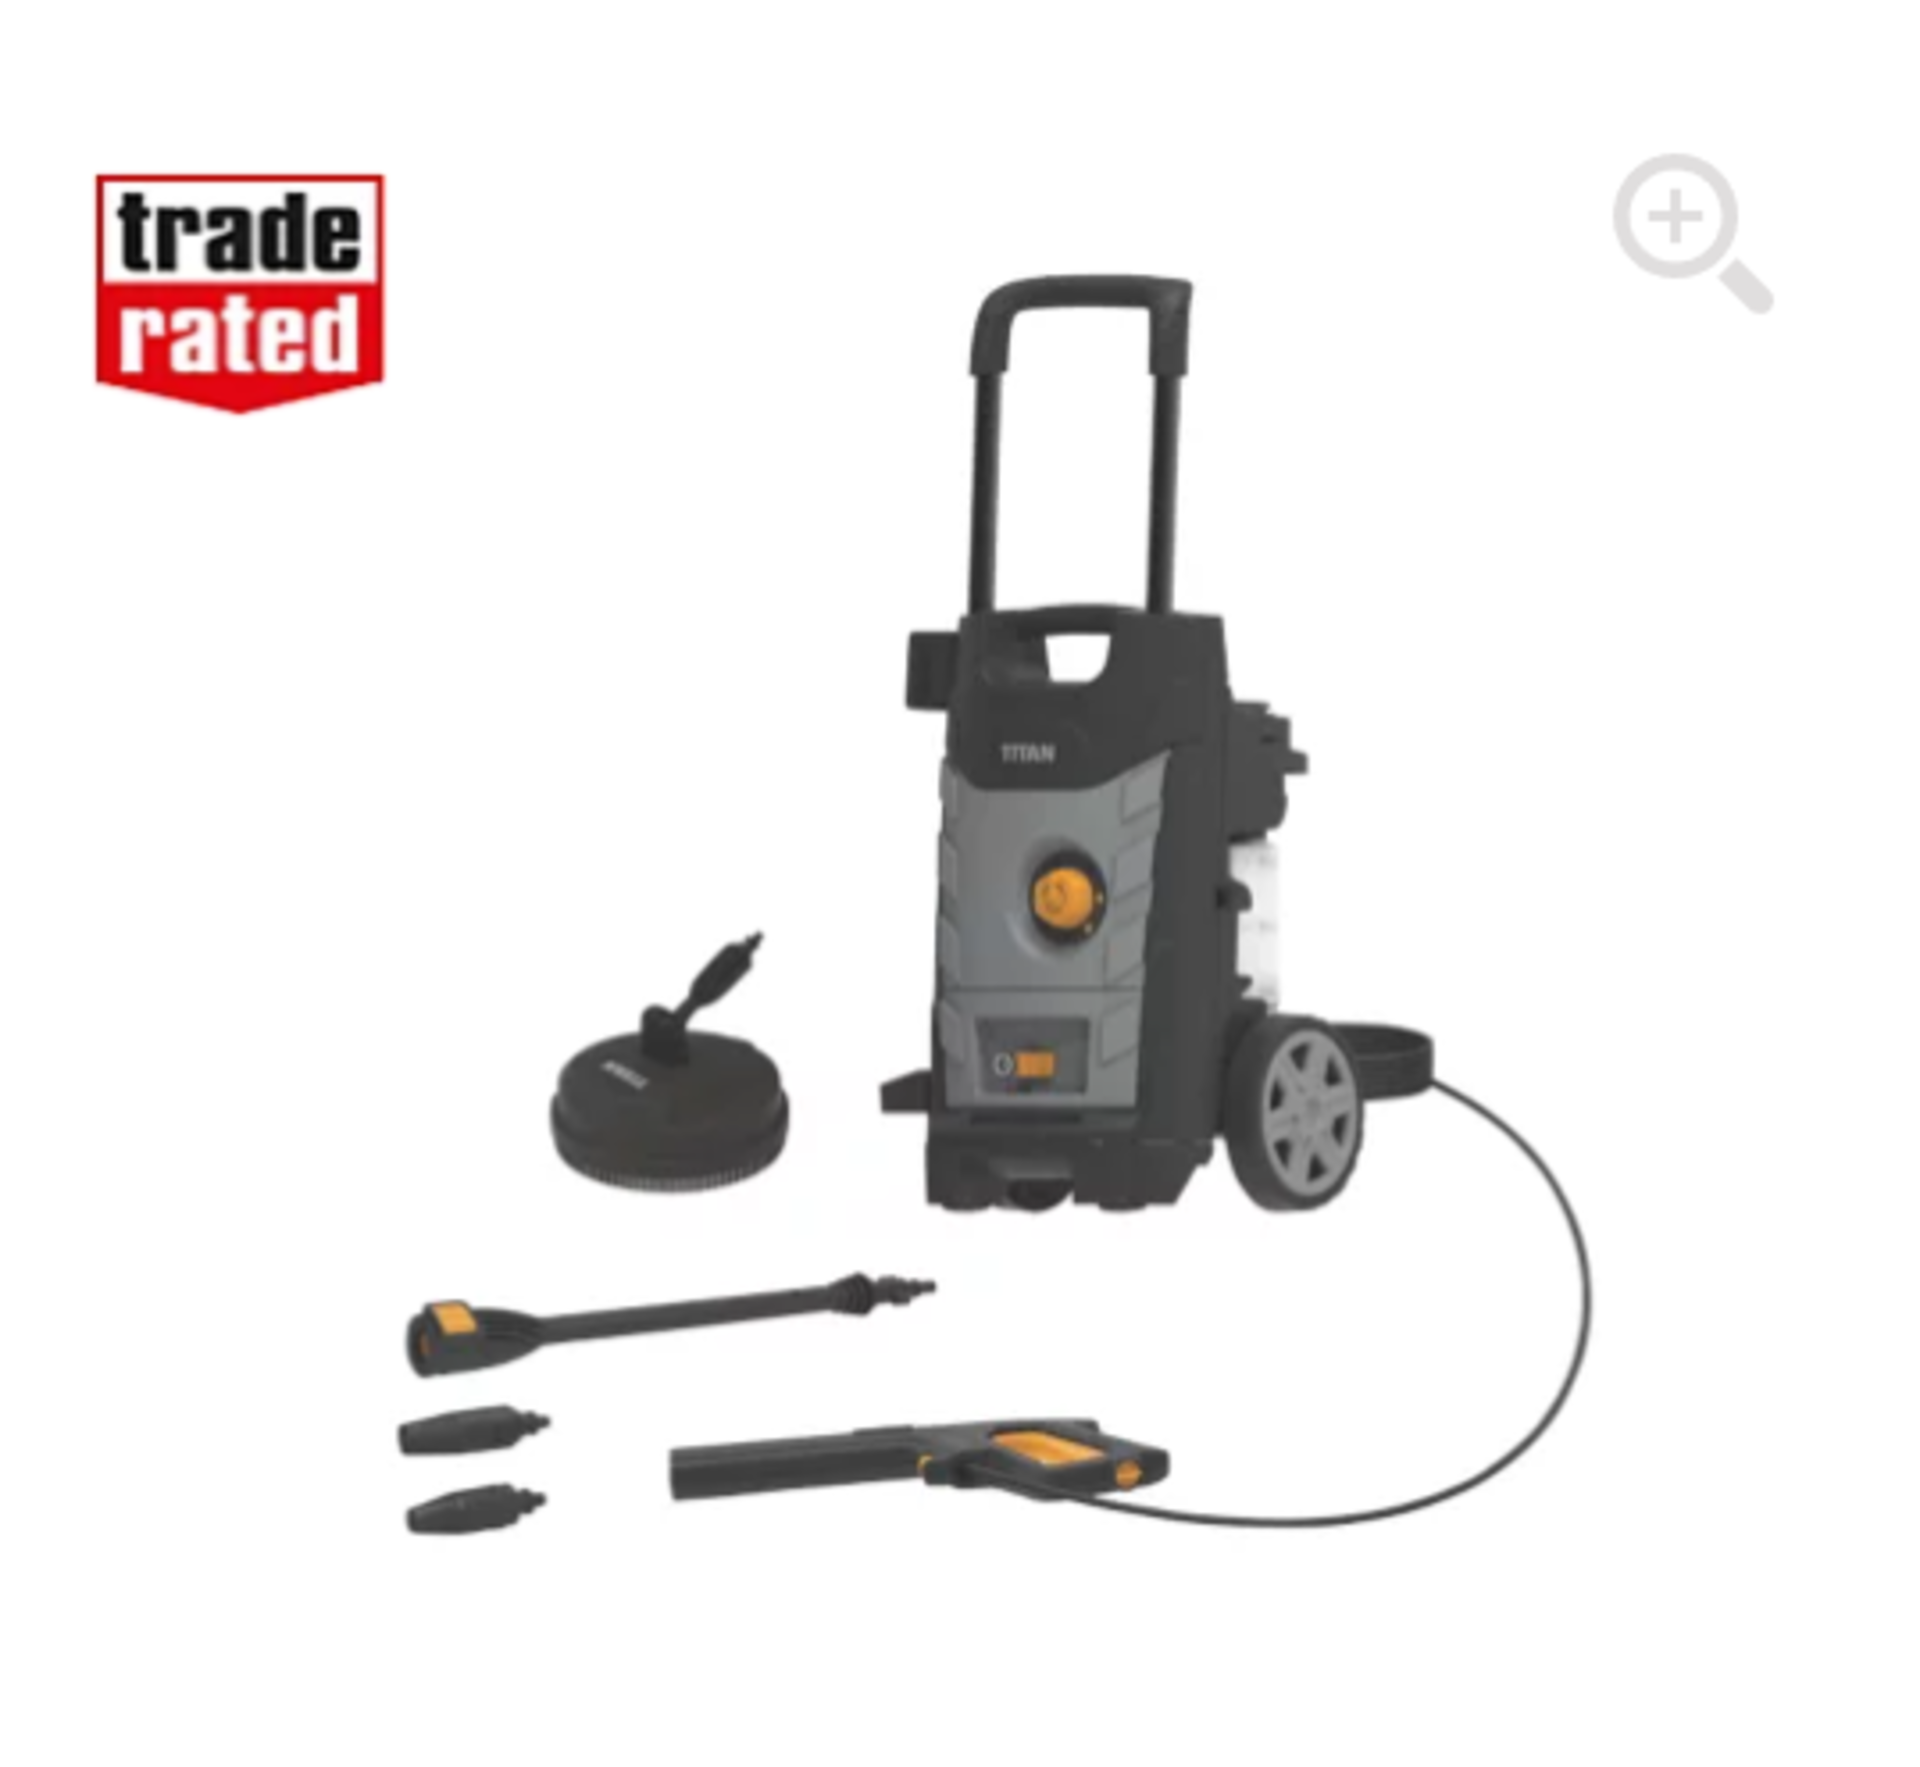 TITAN TTB1800PRW 140BAR ELECTRIC HIGH PRESSURE WASHER 1.8KW 230V. - P6. Compact design with space-